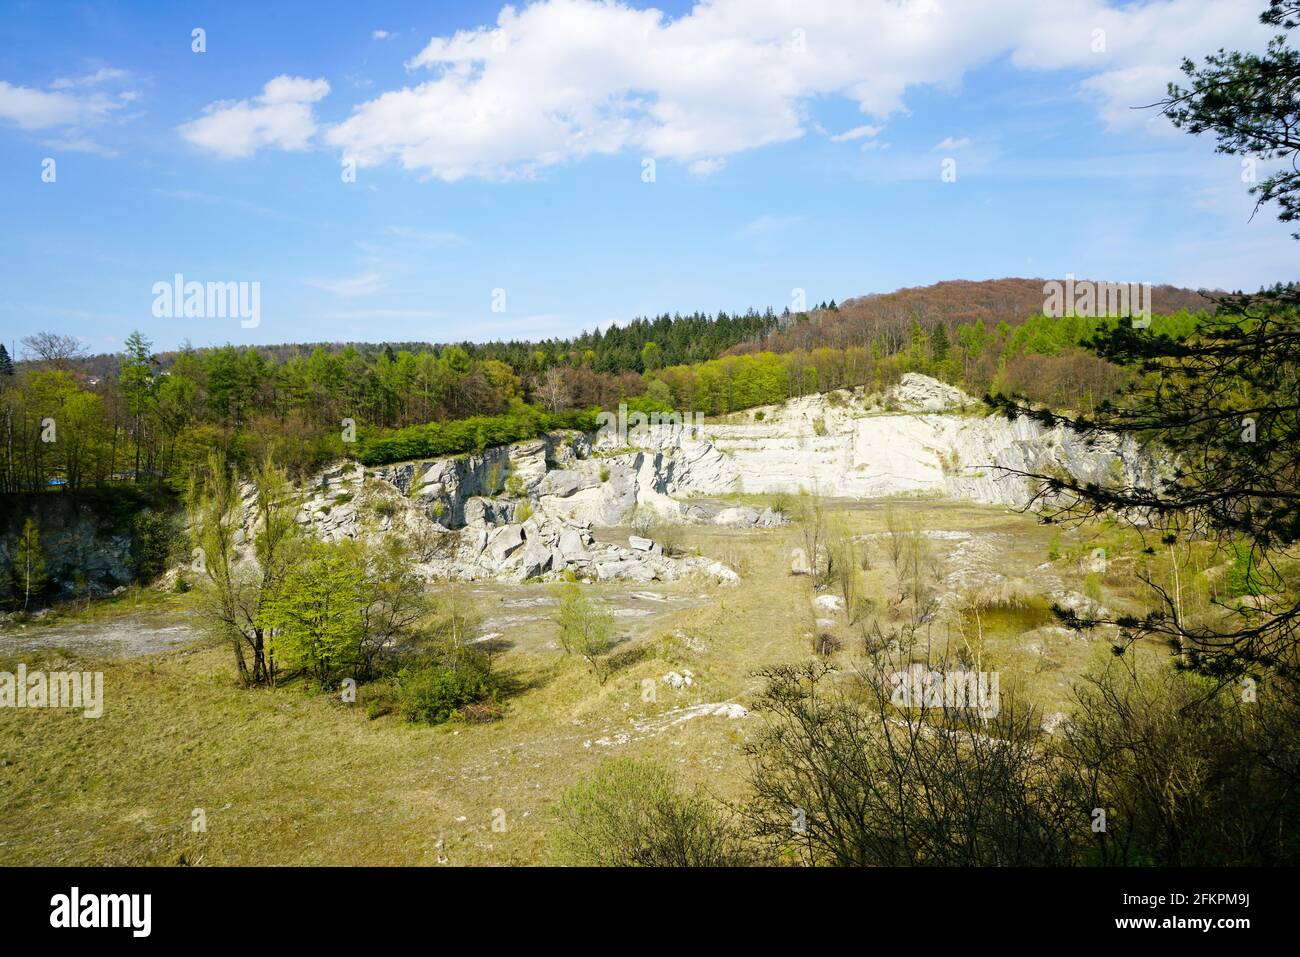 Old limestone quarry near Oerlinghausen. Lime mining in North Rhine-Westphalia. Disused quarry area Stock Photo